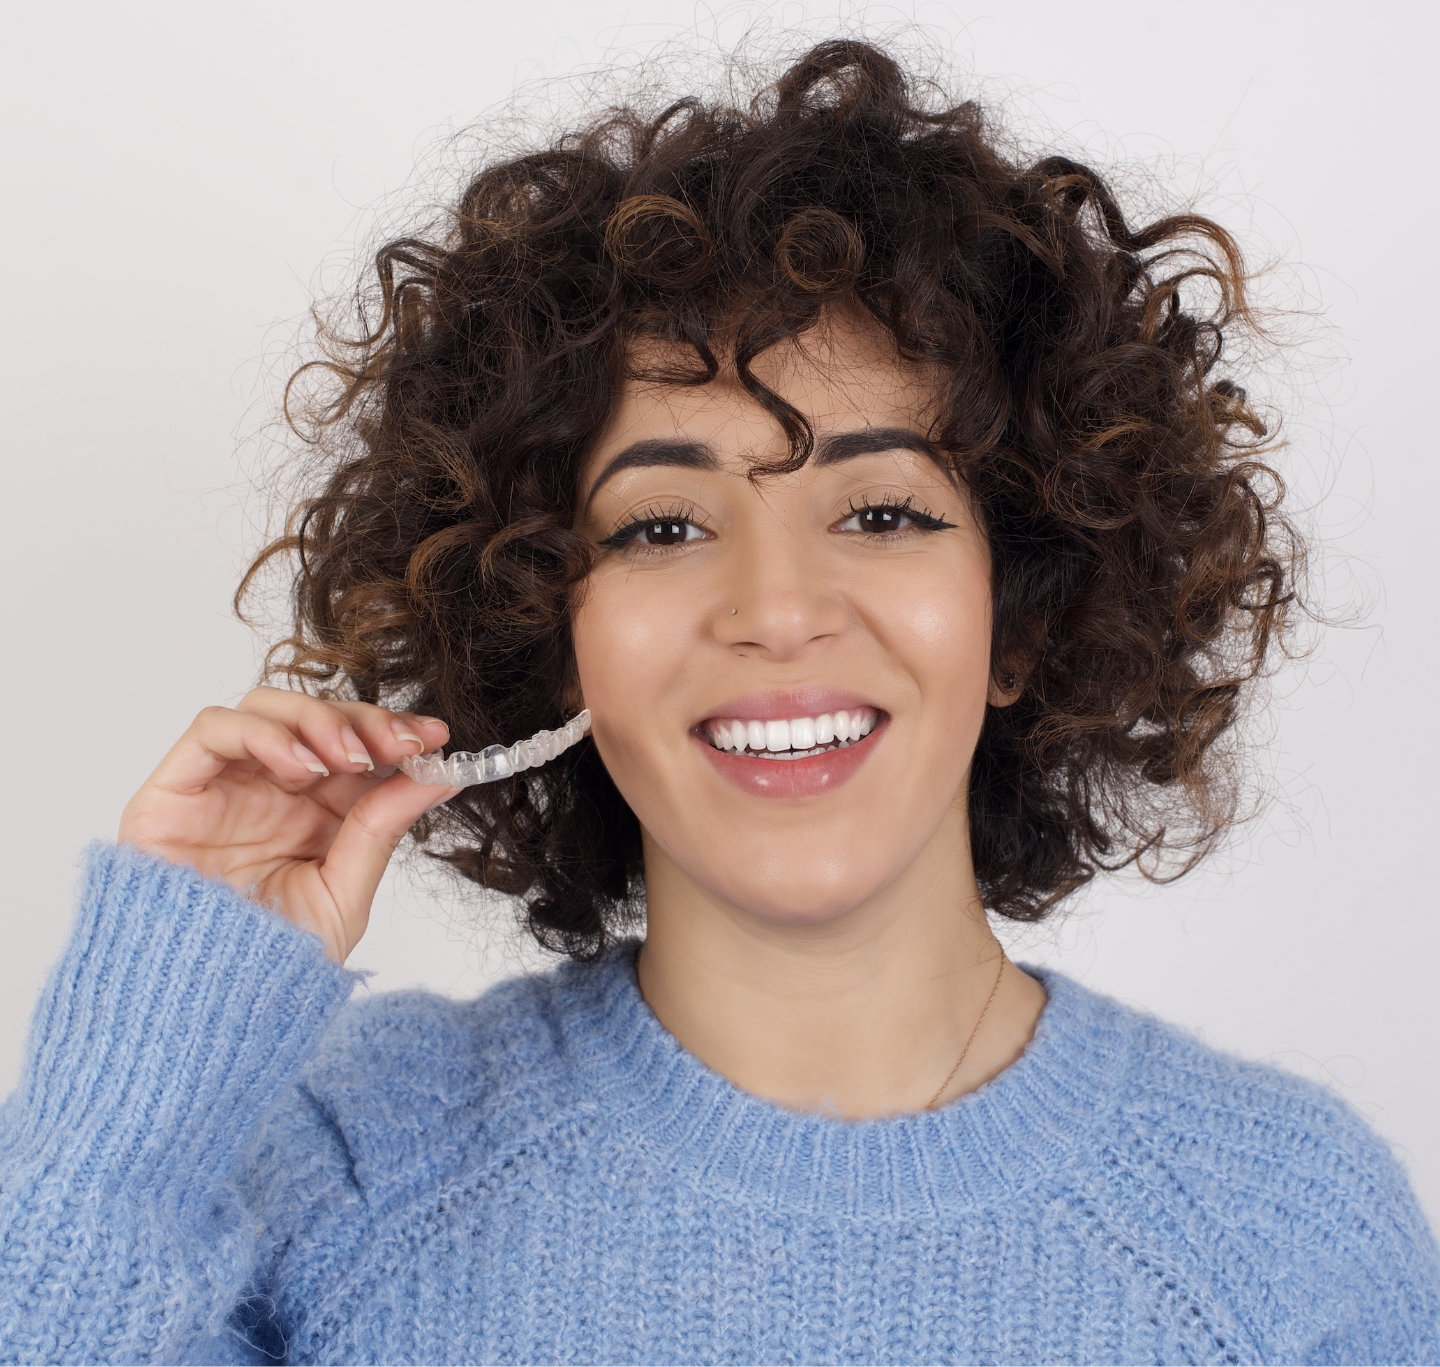 Invisalign NYC - Woman holding aligners.